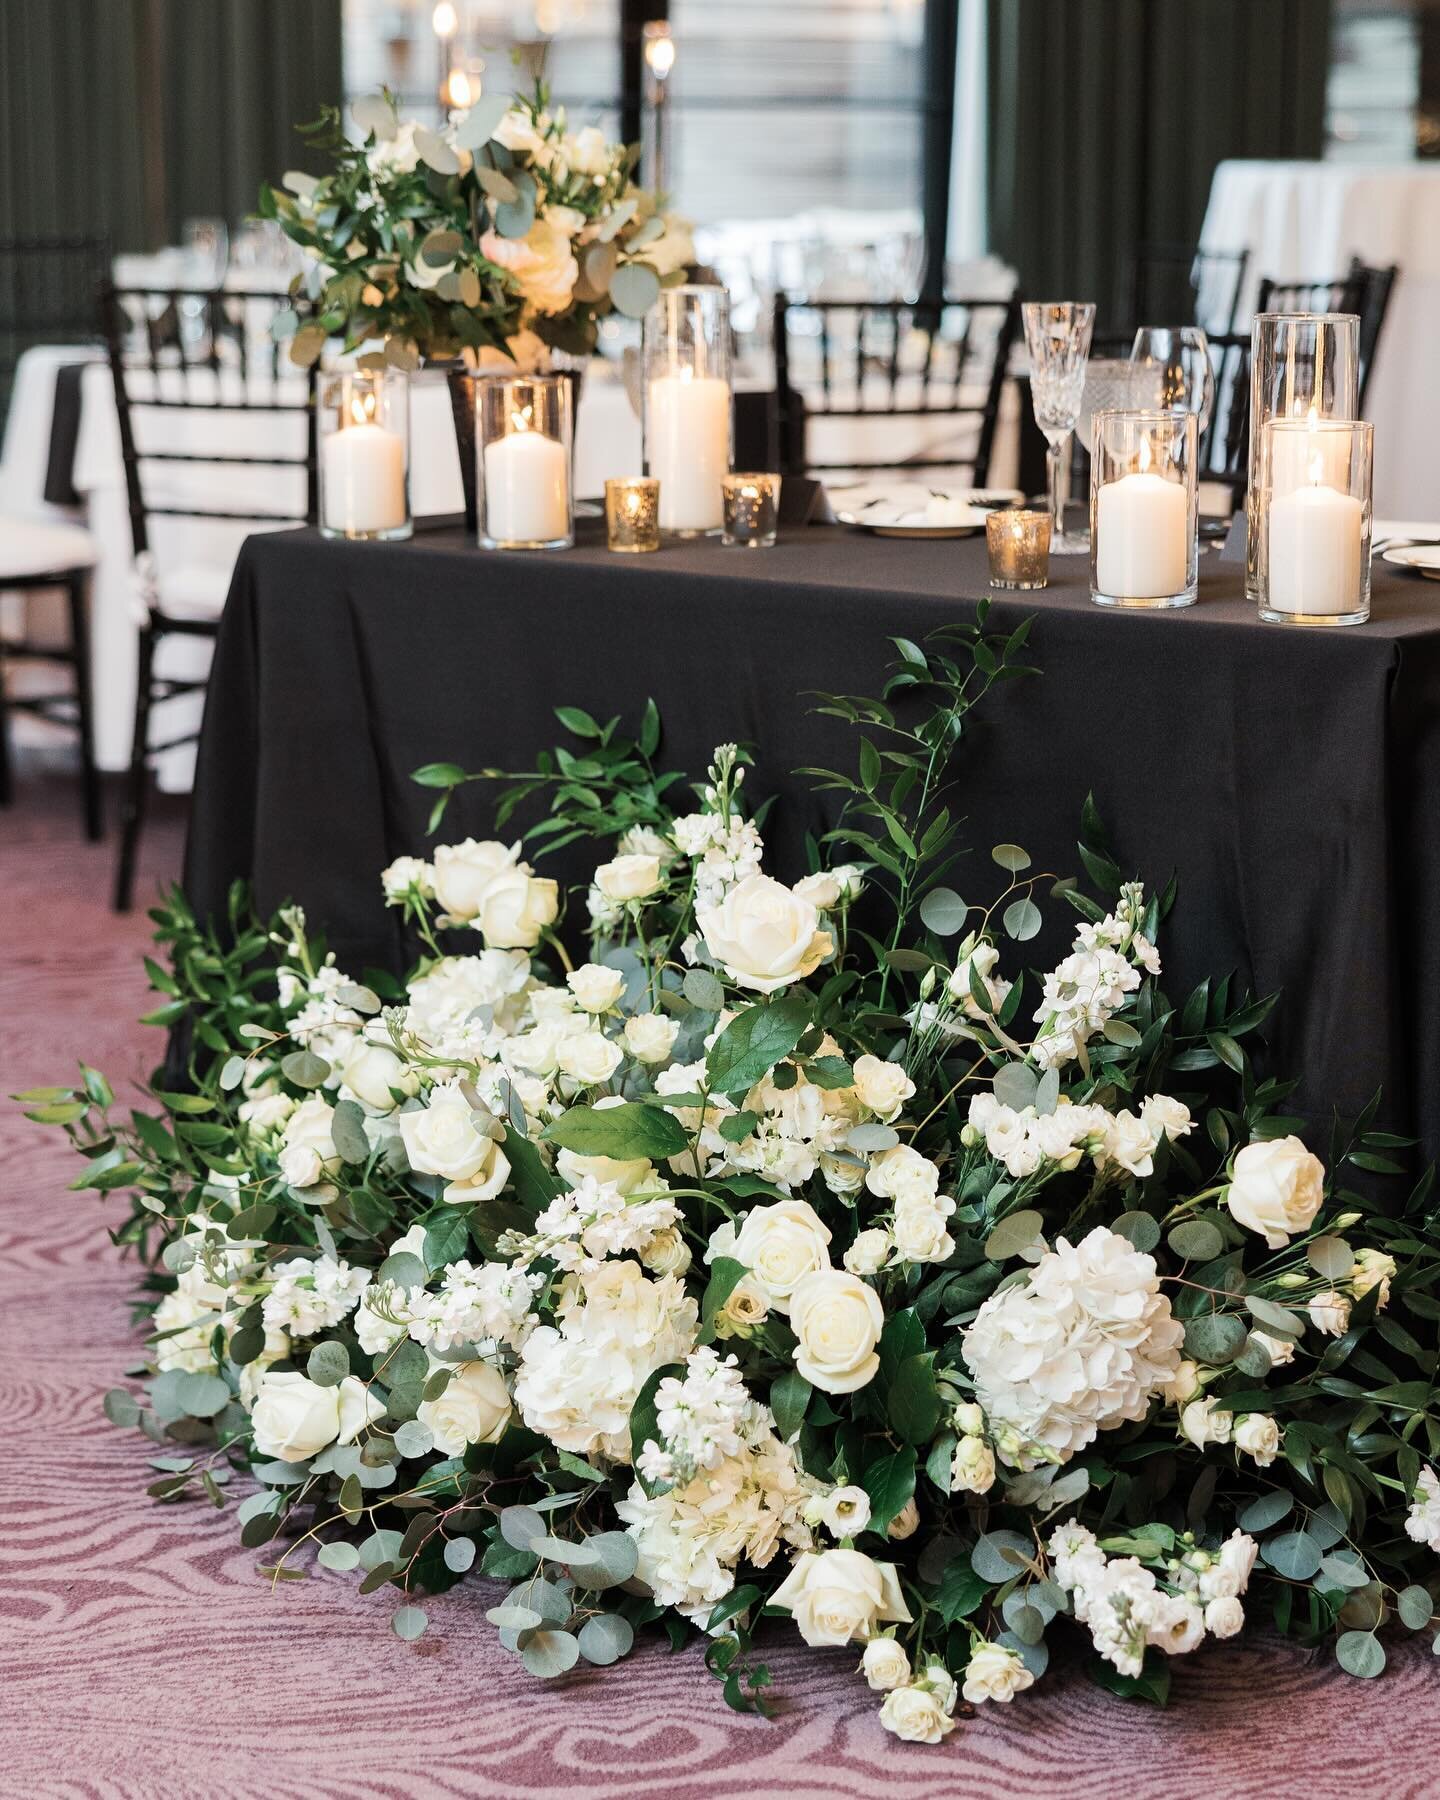 Table set for two✨ We&rsquo;re big fans of a classic black and white theme. N+B&rsquo;s sweetheart table did not disappoint! 

Planning @alloreevents 
Photography @greenhousephotography.co 
Venue @dupontcirclehotel 
Florals @edgefloraleventdesigners 